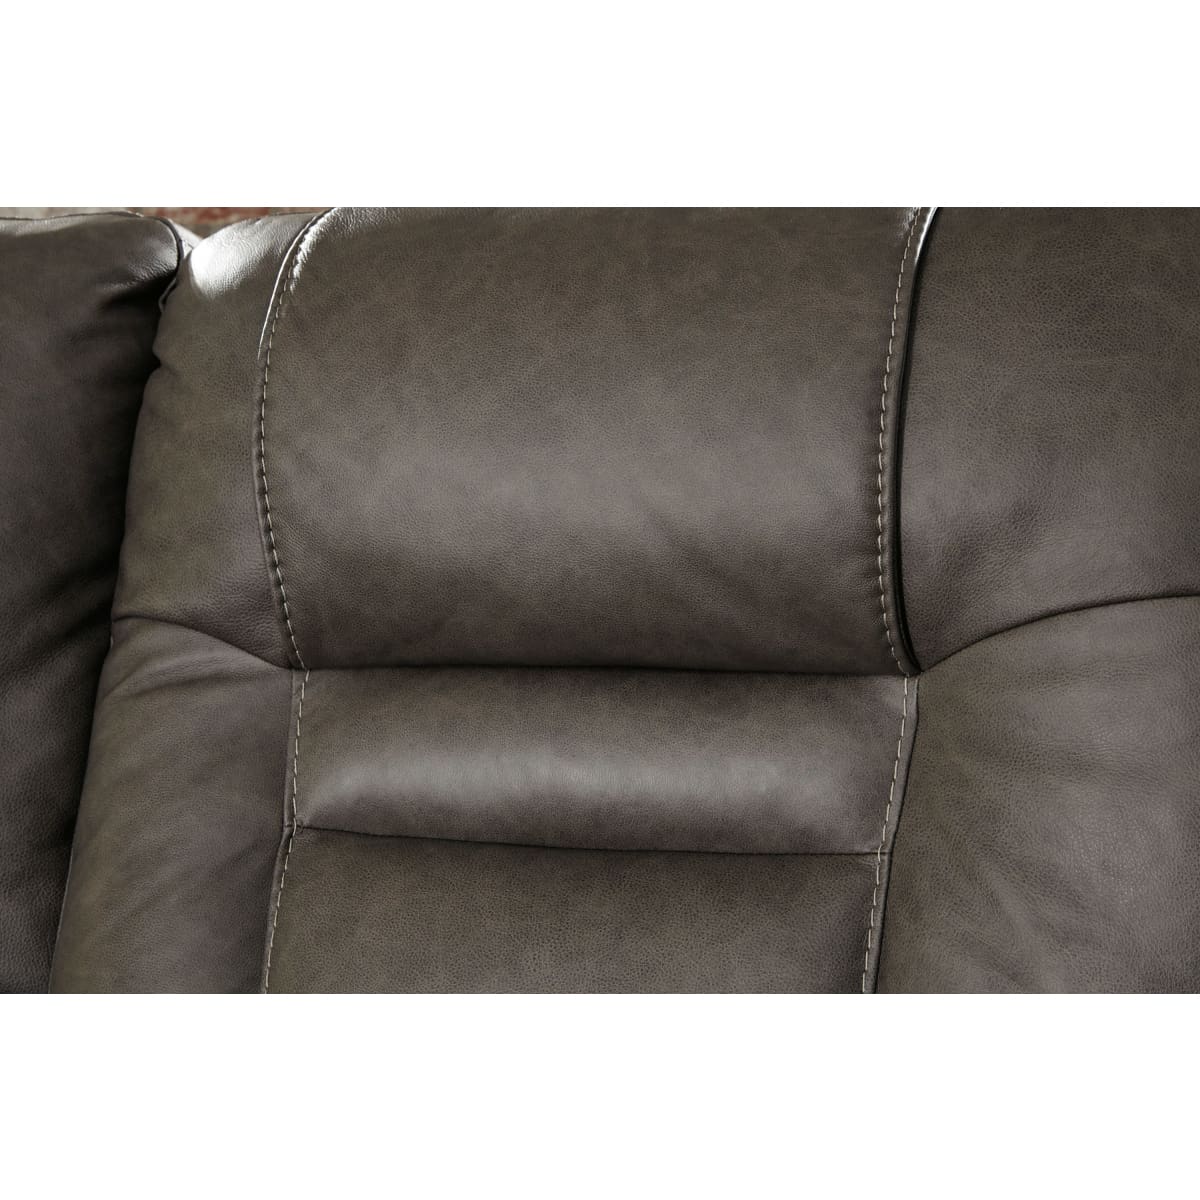 Wurstrow Smoke Power Reclining Loveseat with Console - Loveseat